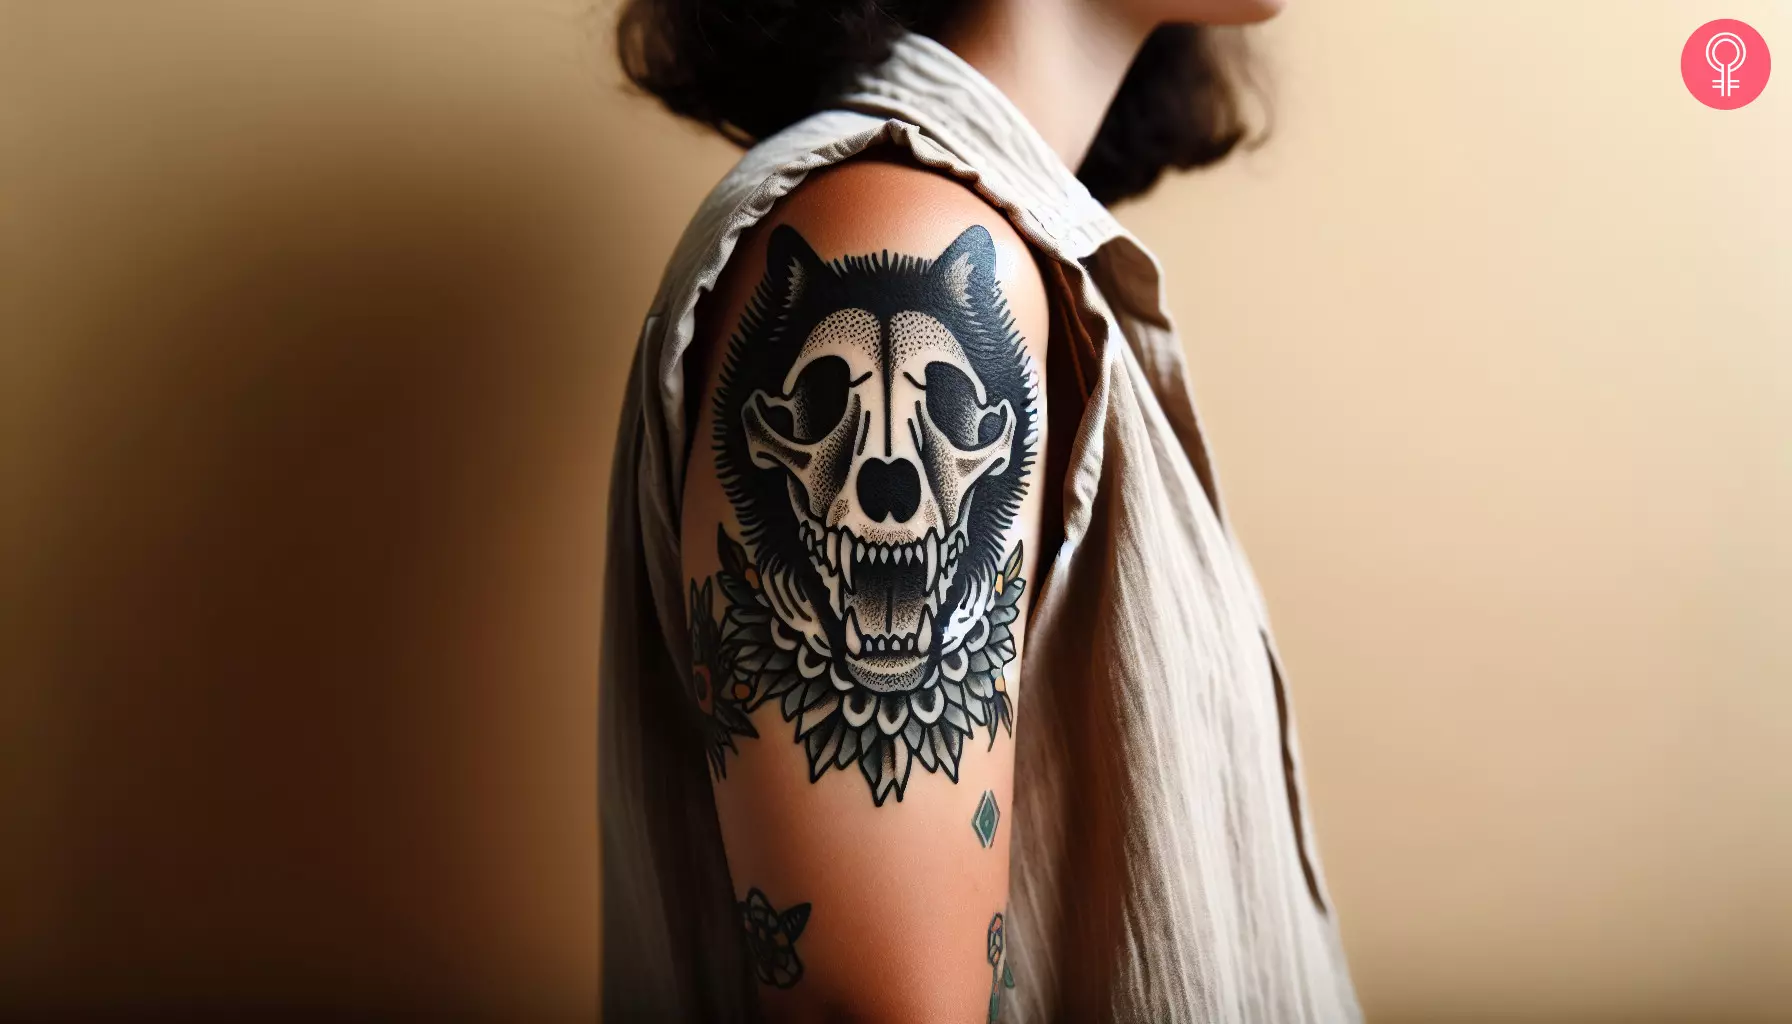 Woman with dog skull tattoo on her upper arm